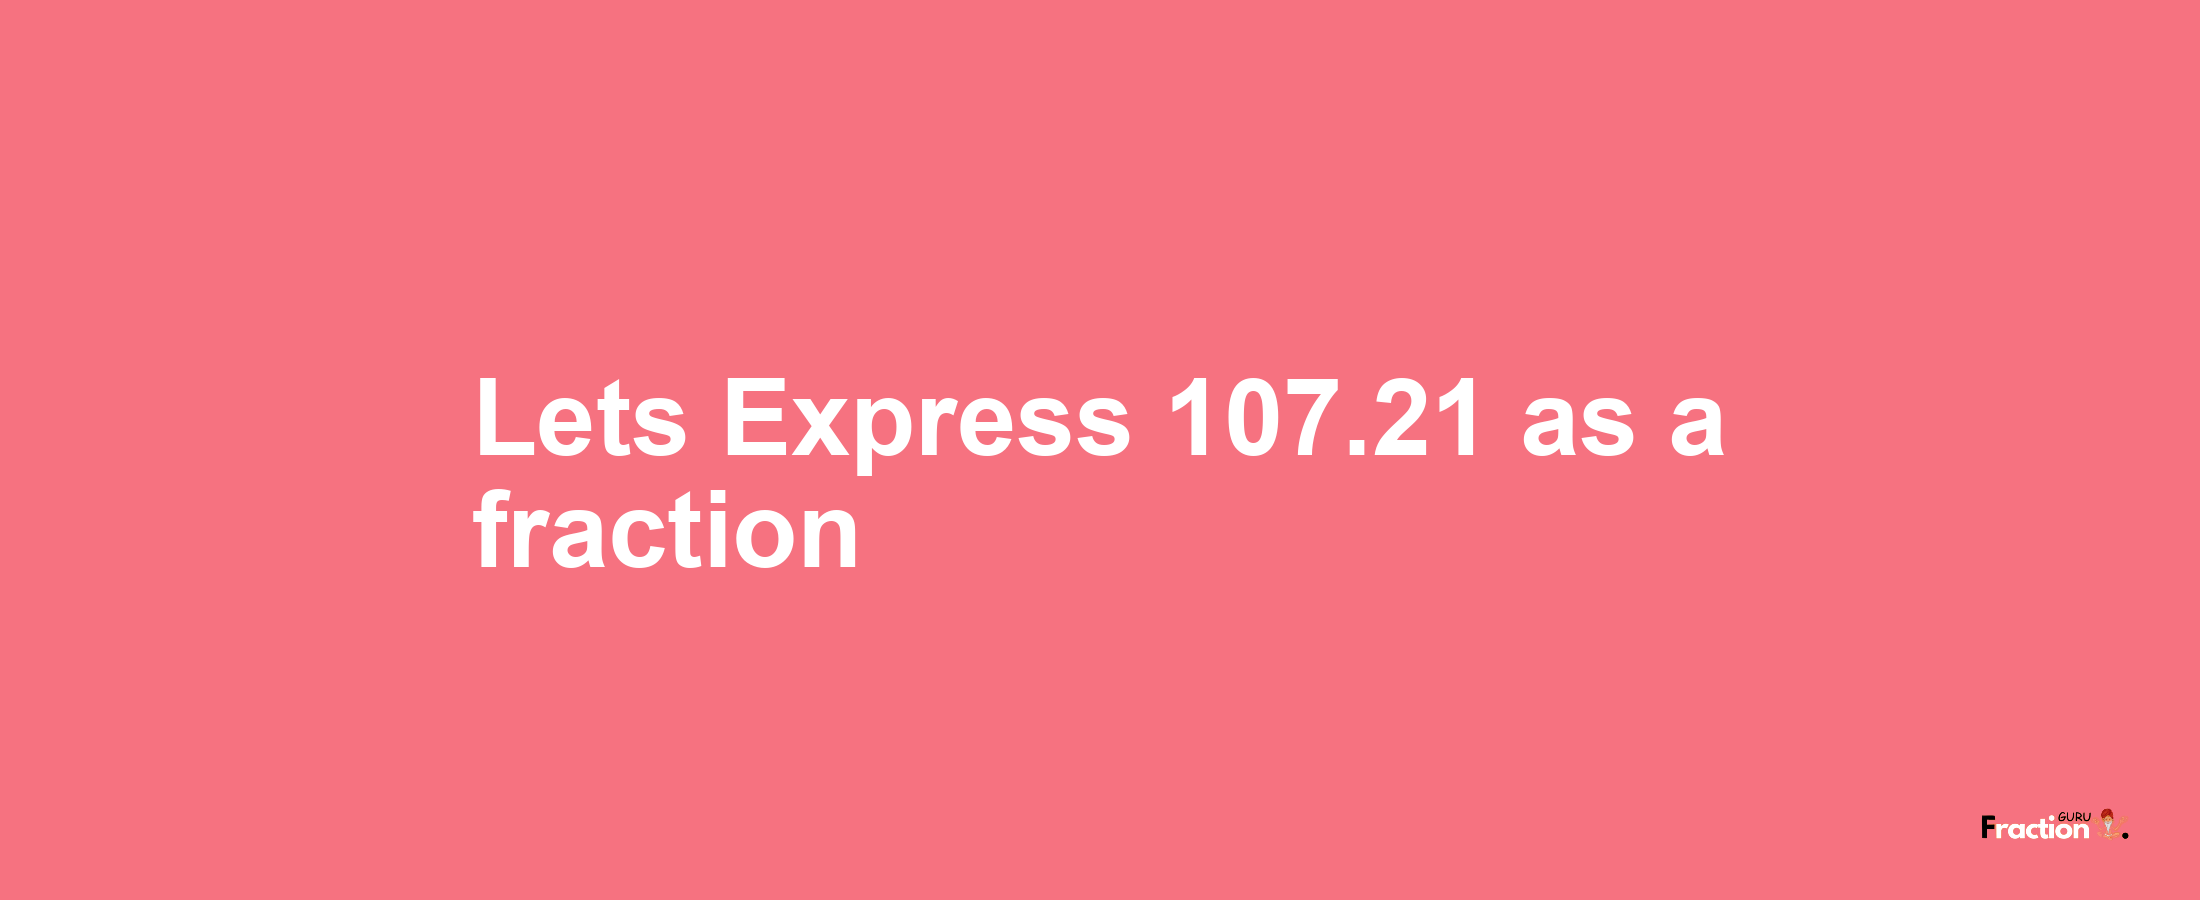 Lets Express 107.21 as afraction